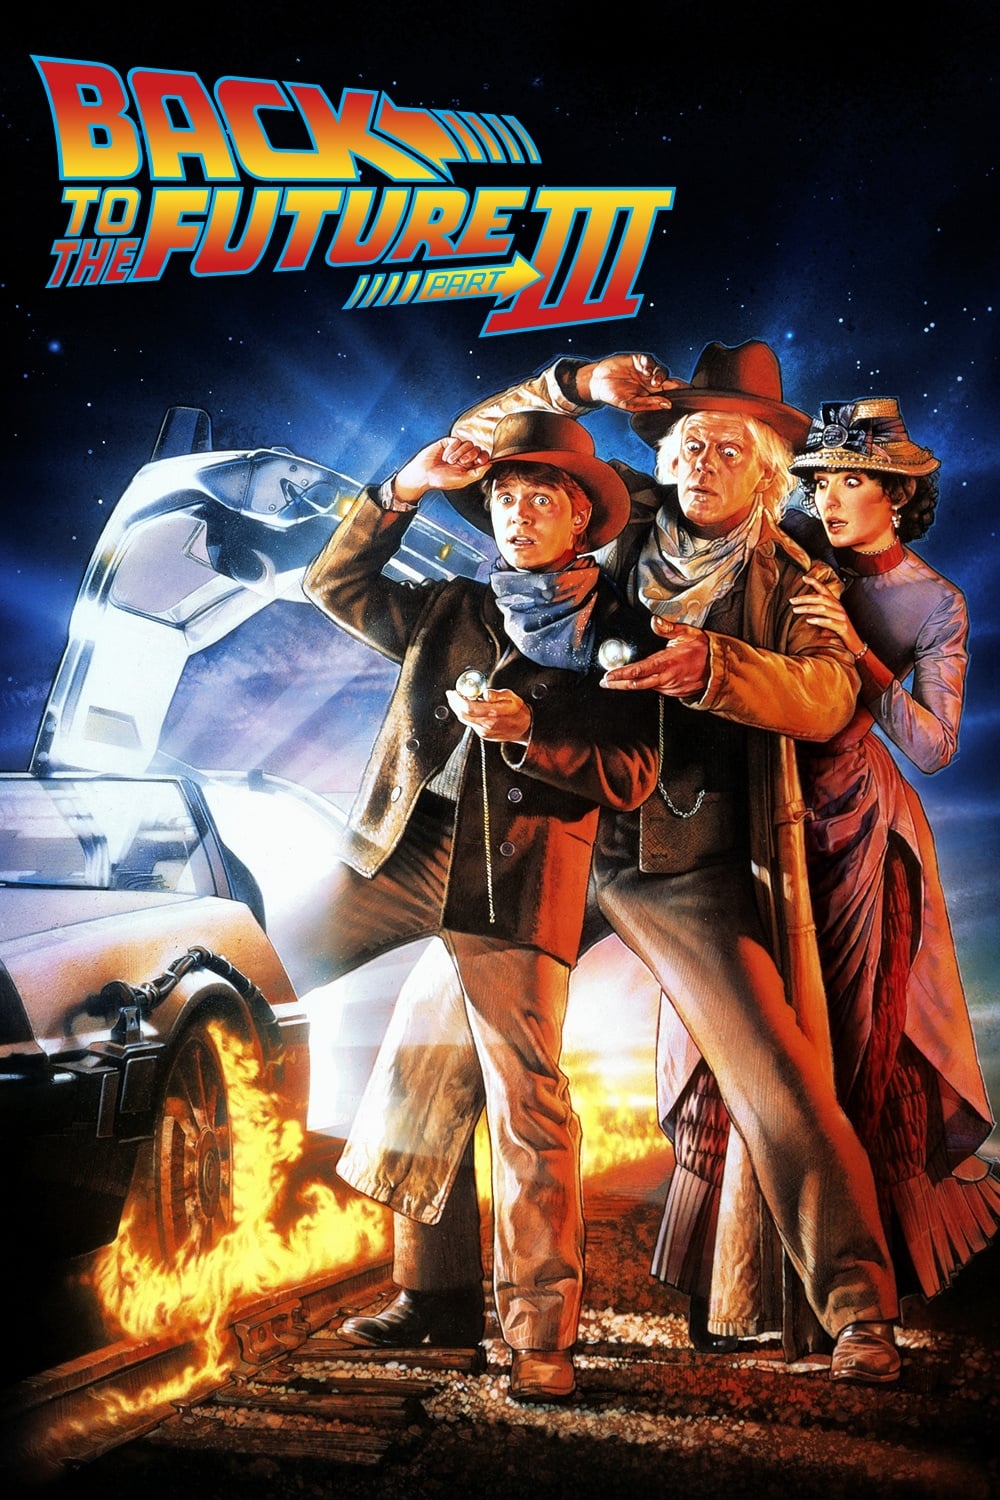 Image for movie Back to the Future Part III